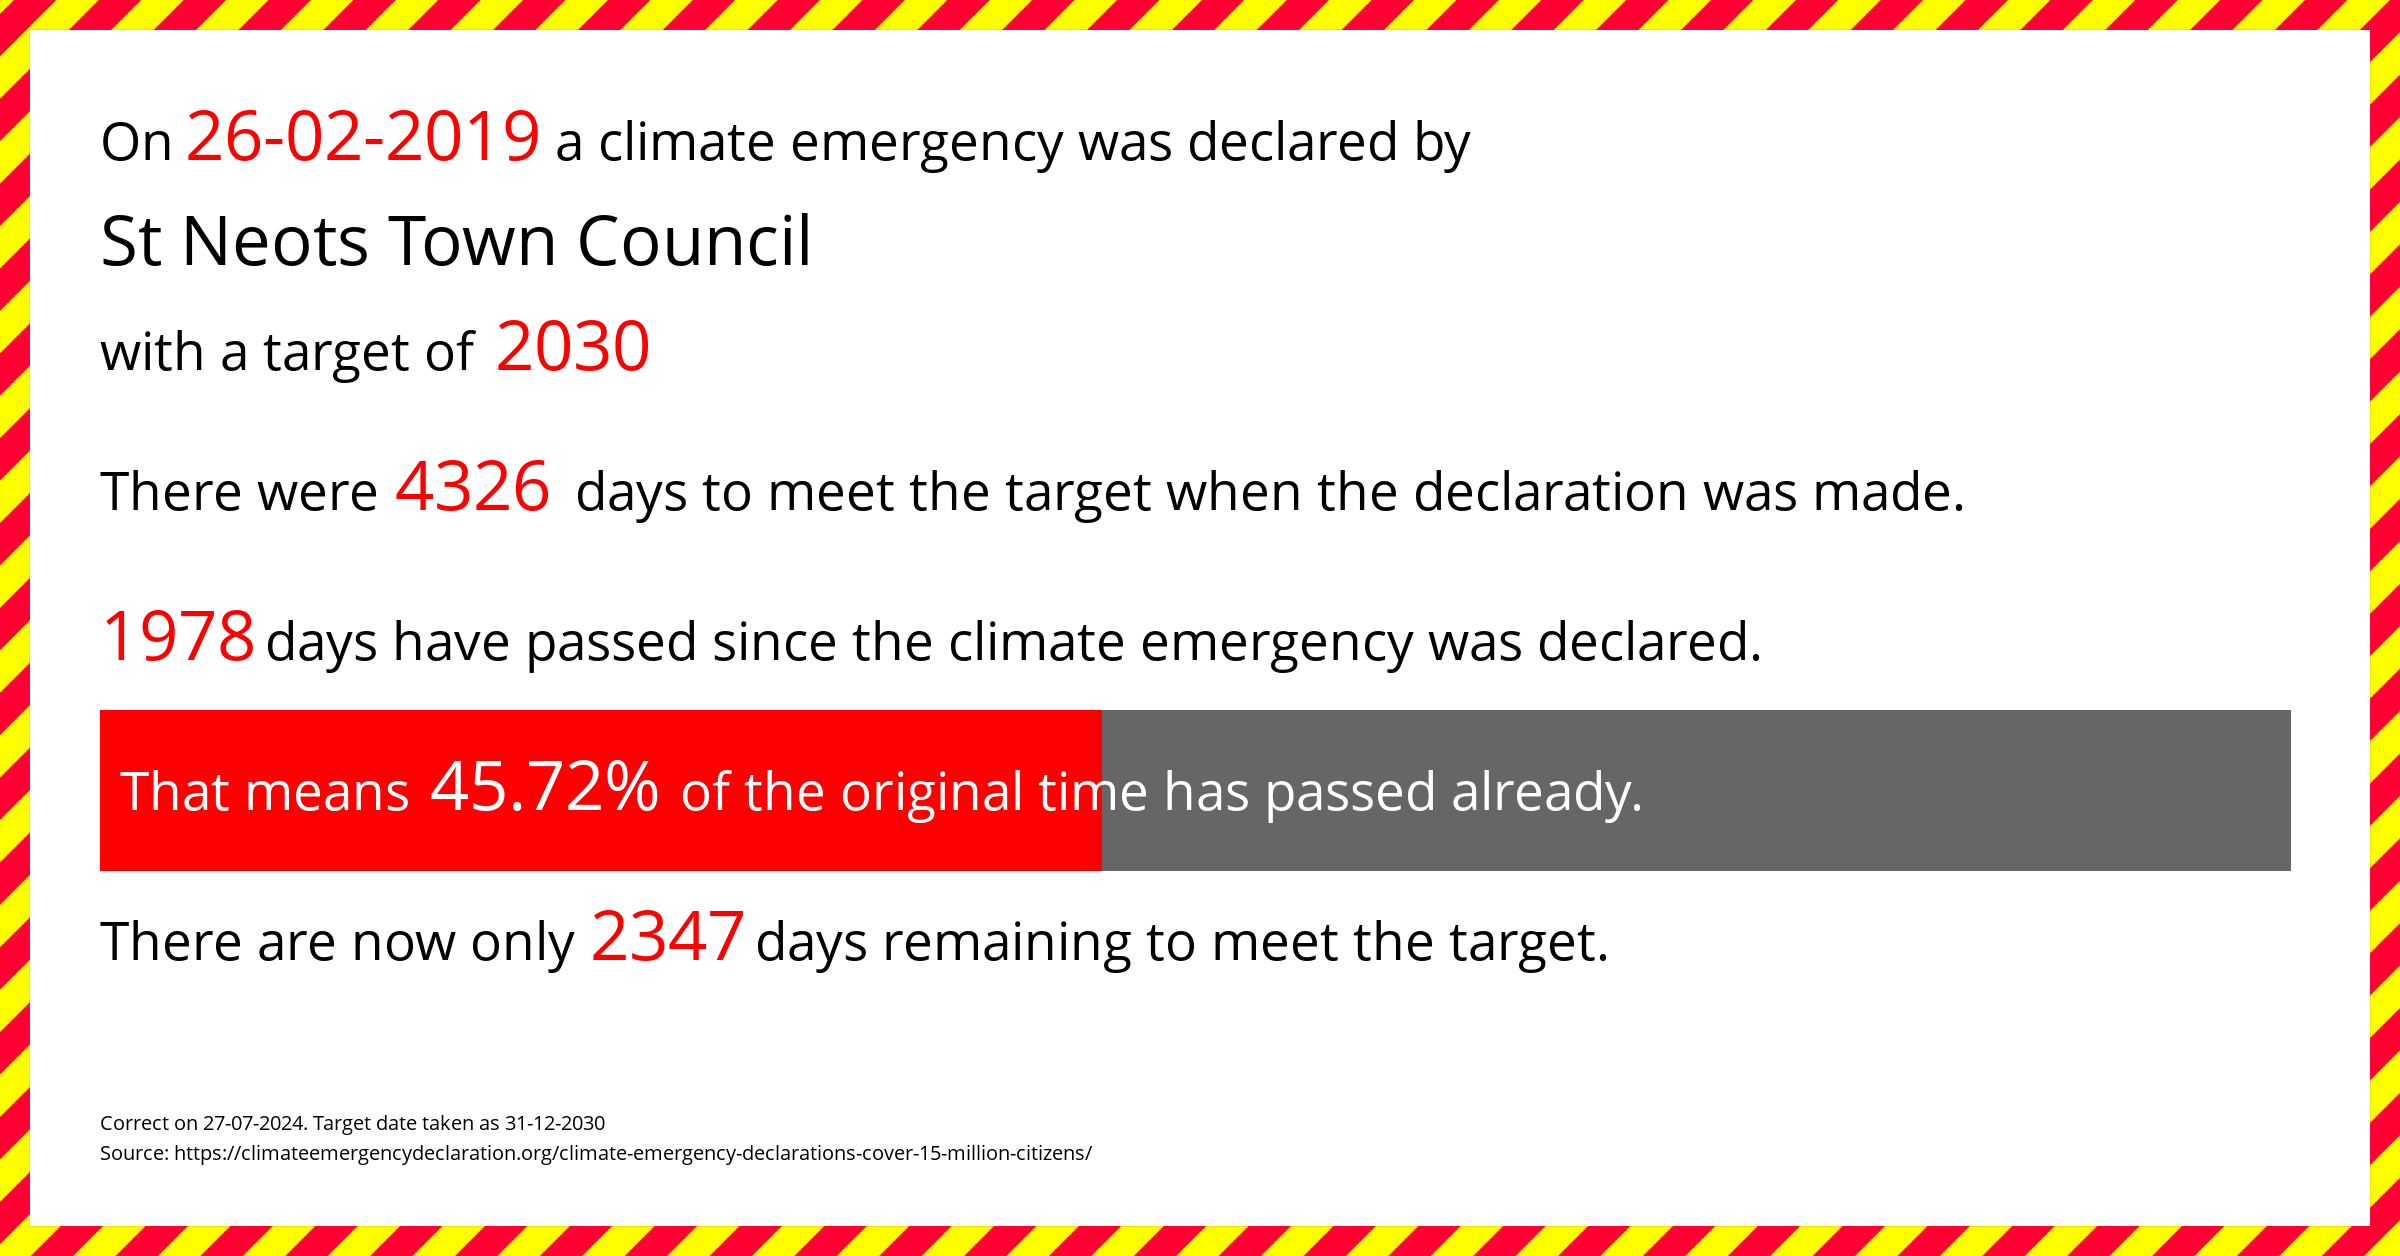 St Neots Town Council declared a Climate emergency on Tuesday 26th February 2019, with a target of 2030.